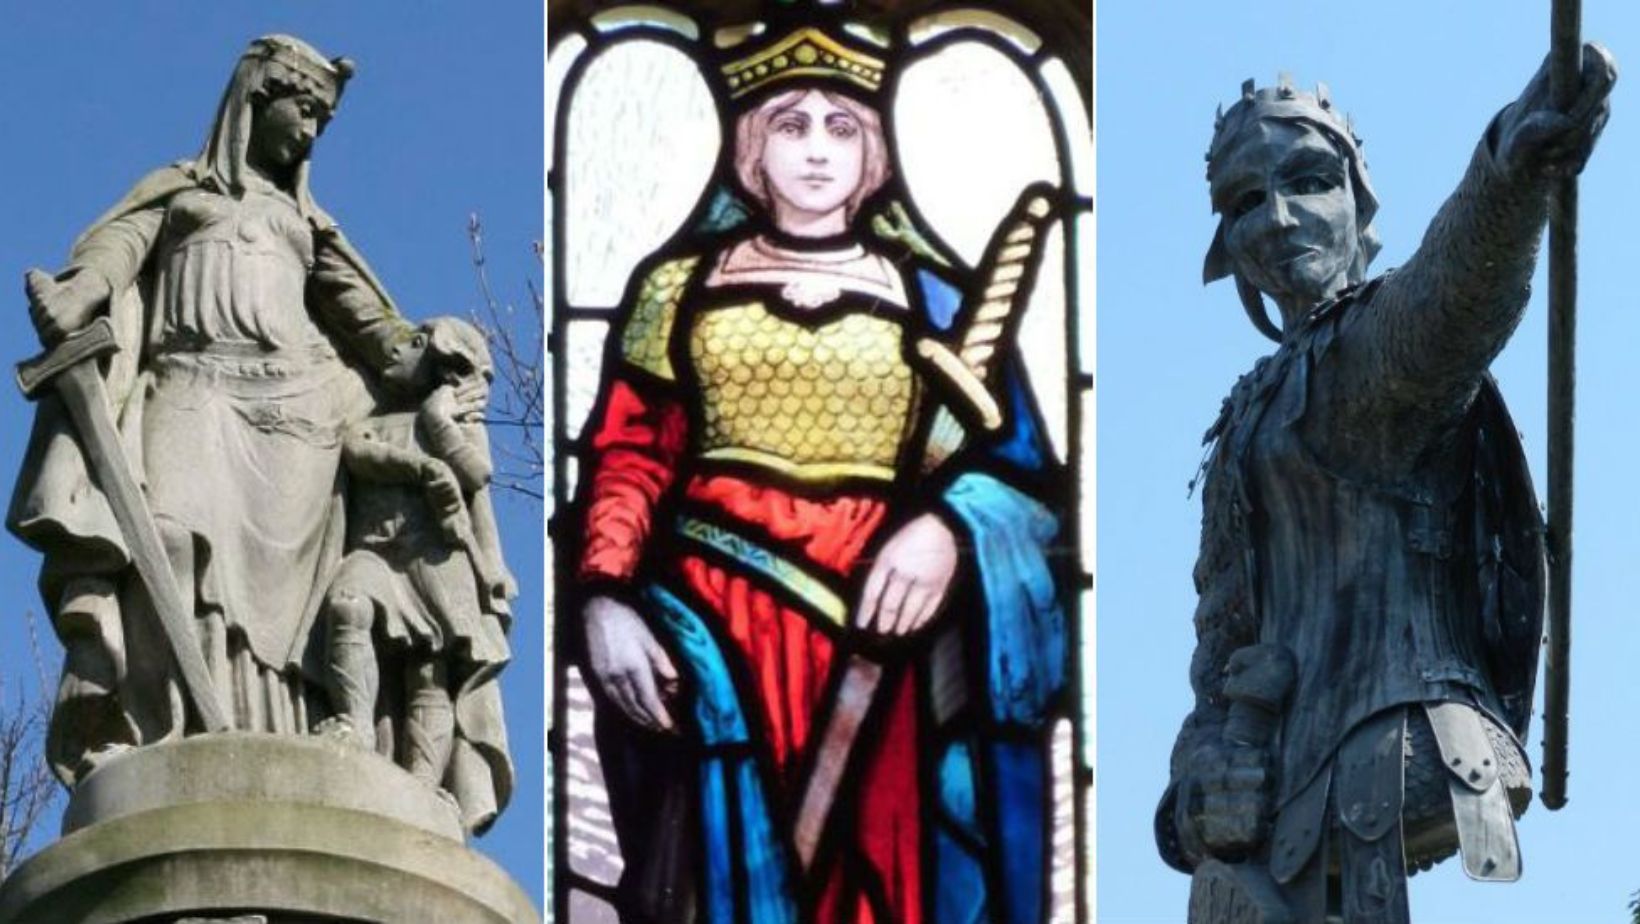 Aethelflaed, Lady of the Mercians